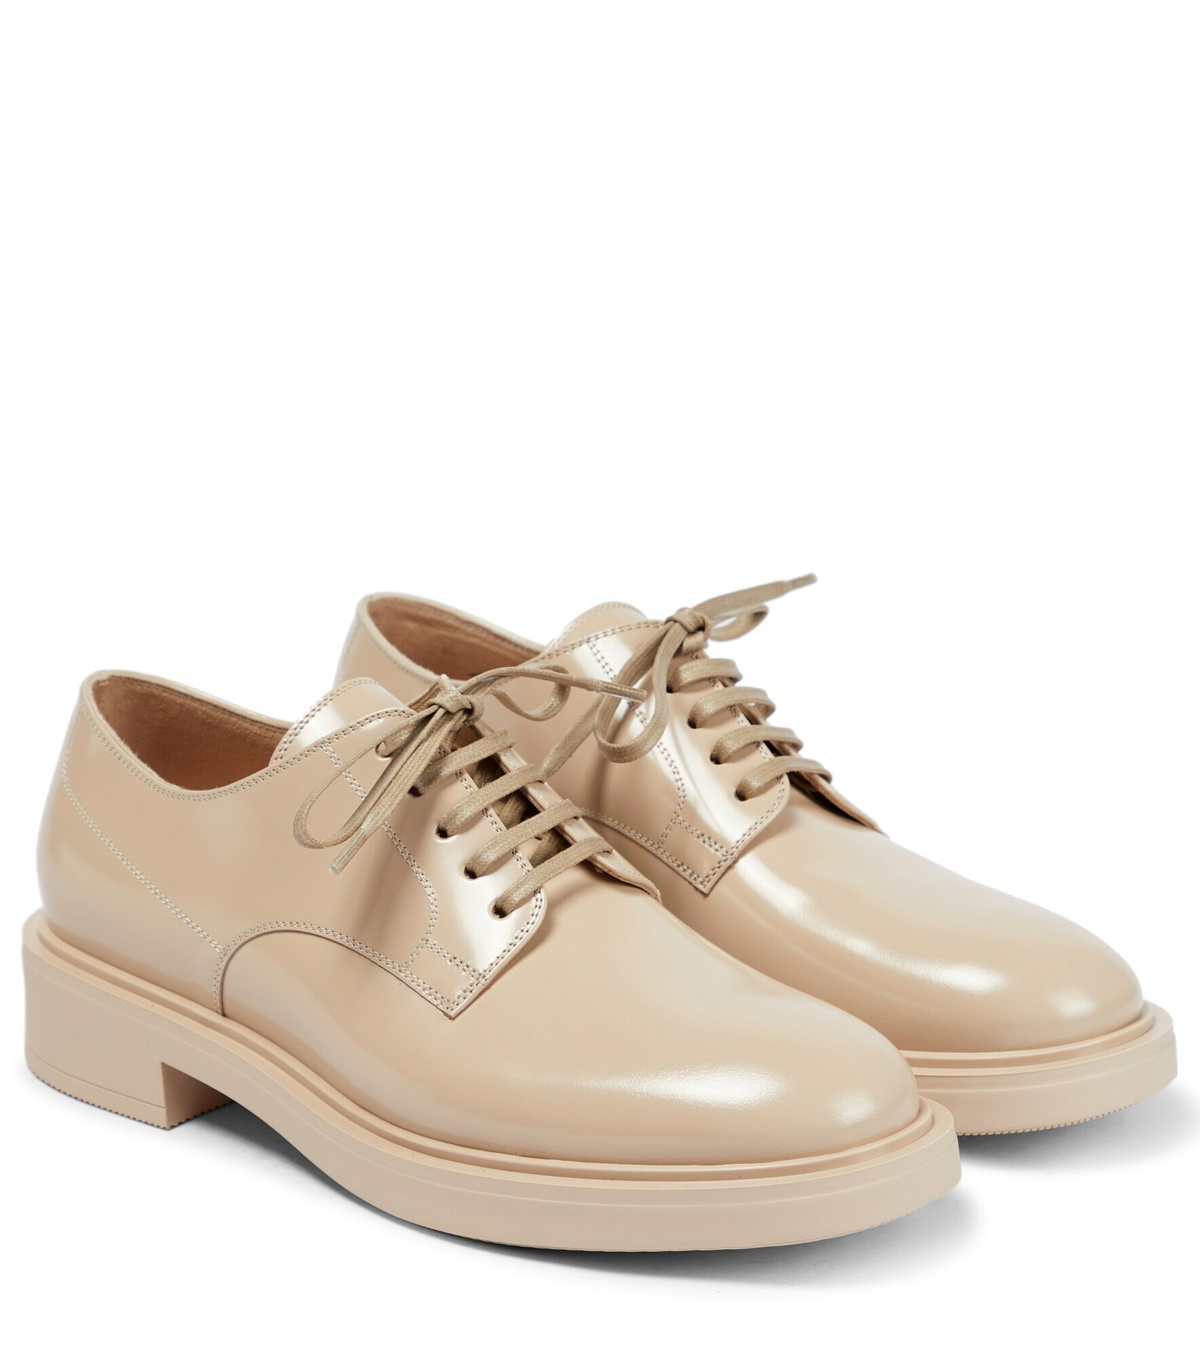 Gianvito Rossi - Bobby patent leather Derby shoes Gianvito Rossi